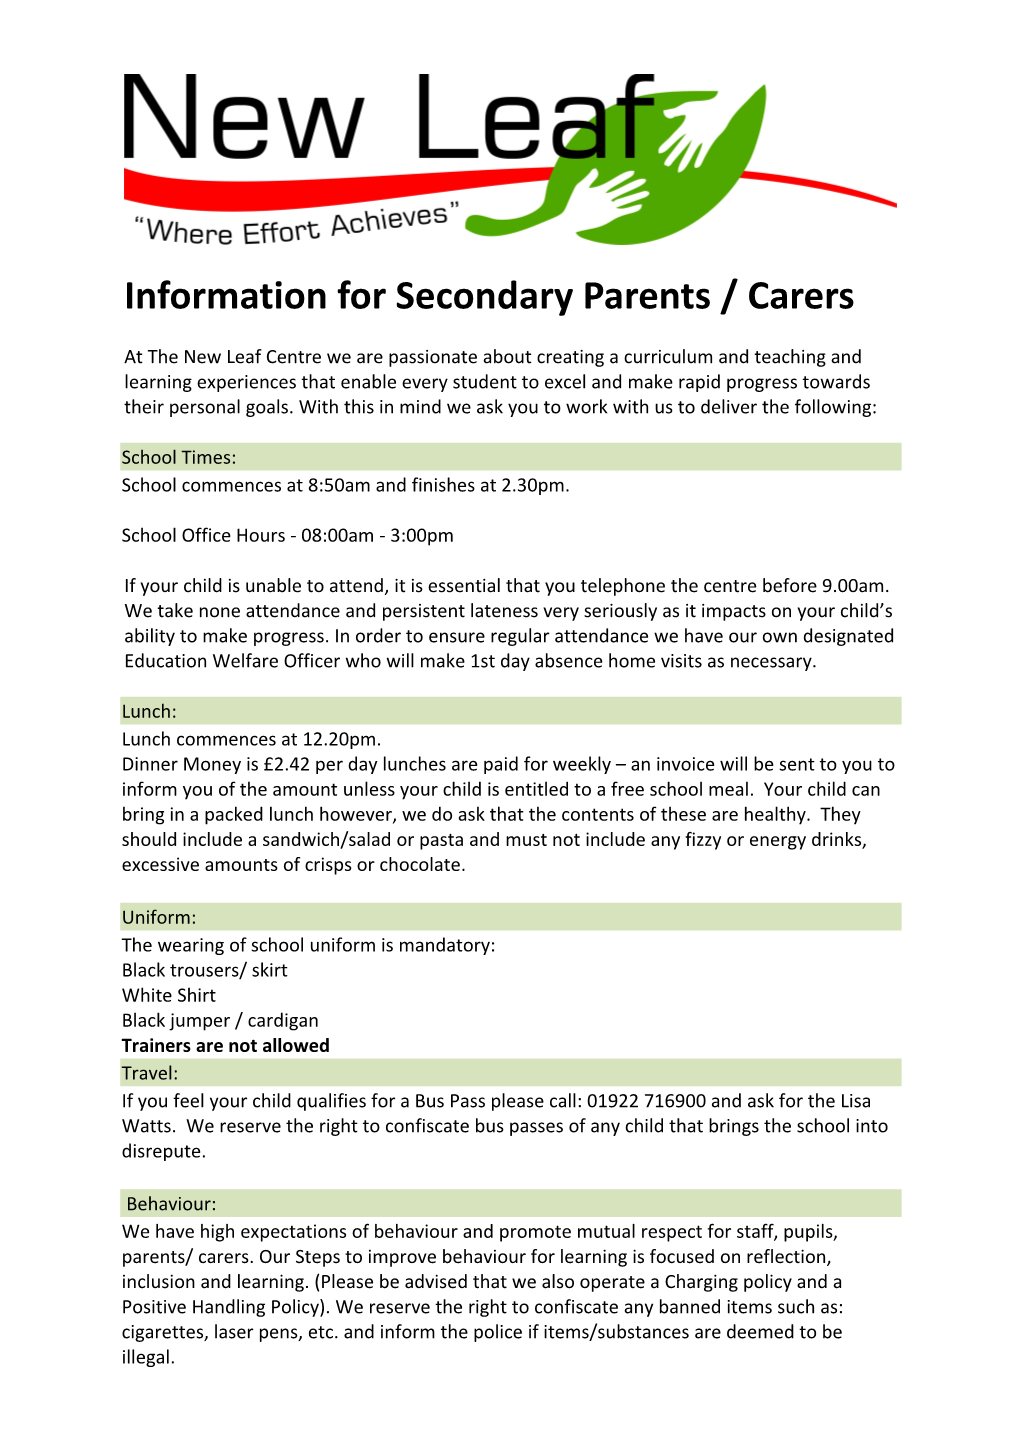 Information for Secondary Parents / Carers